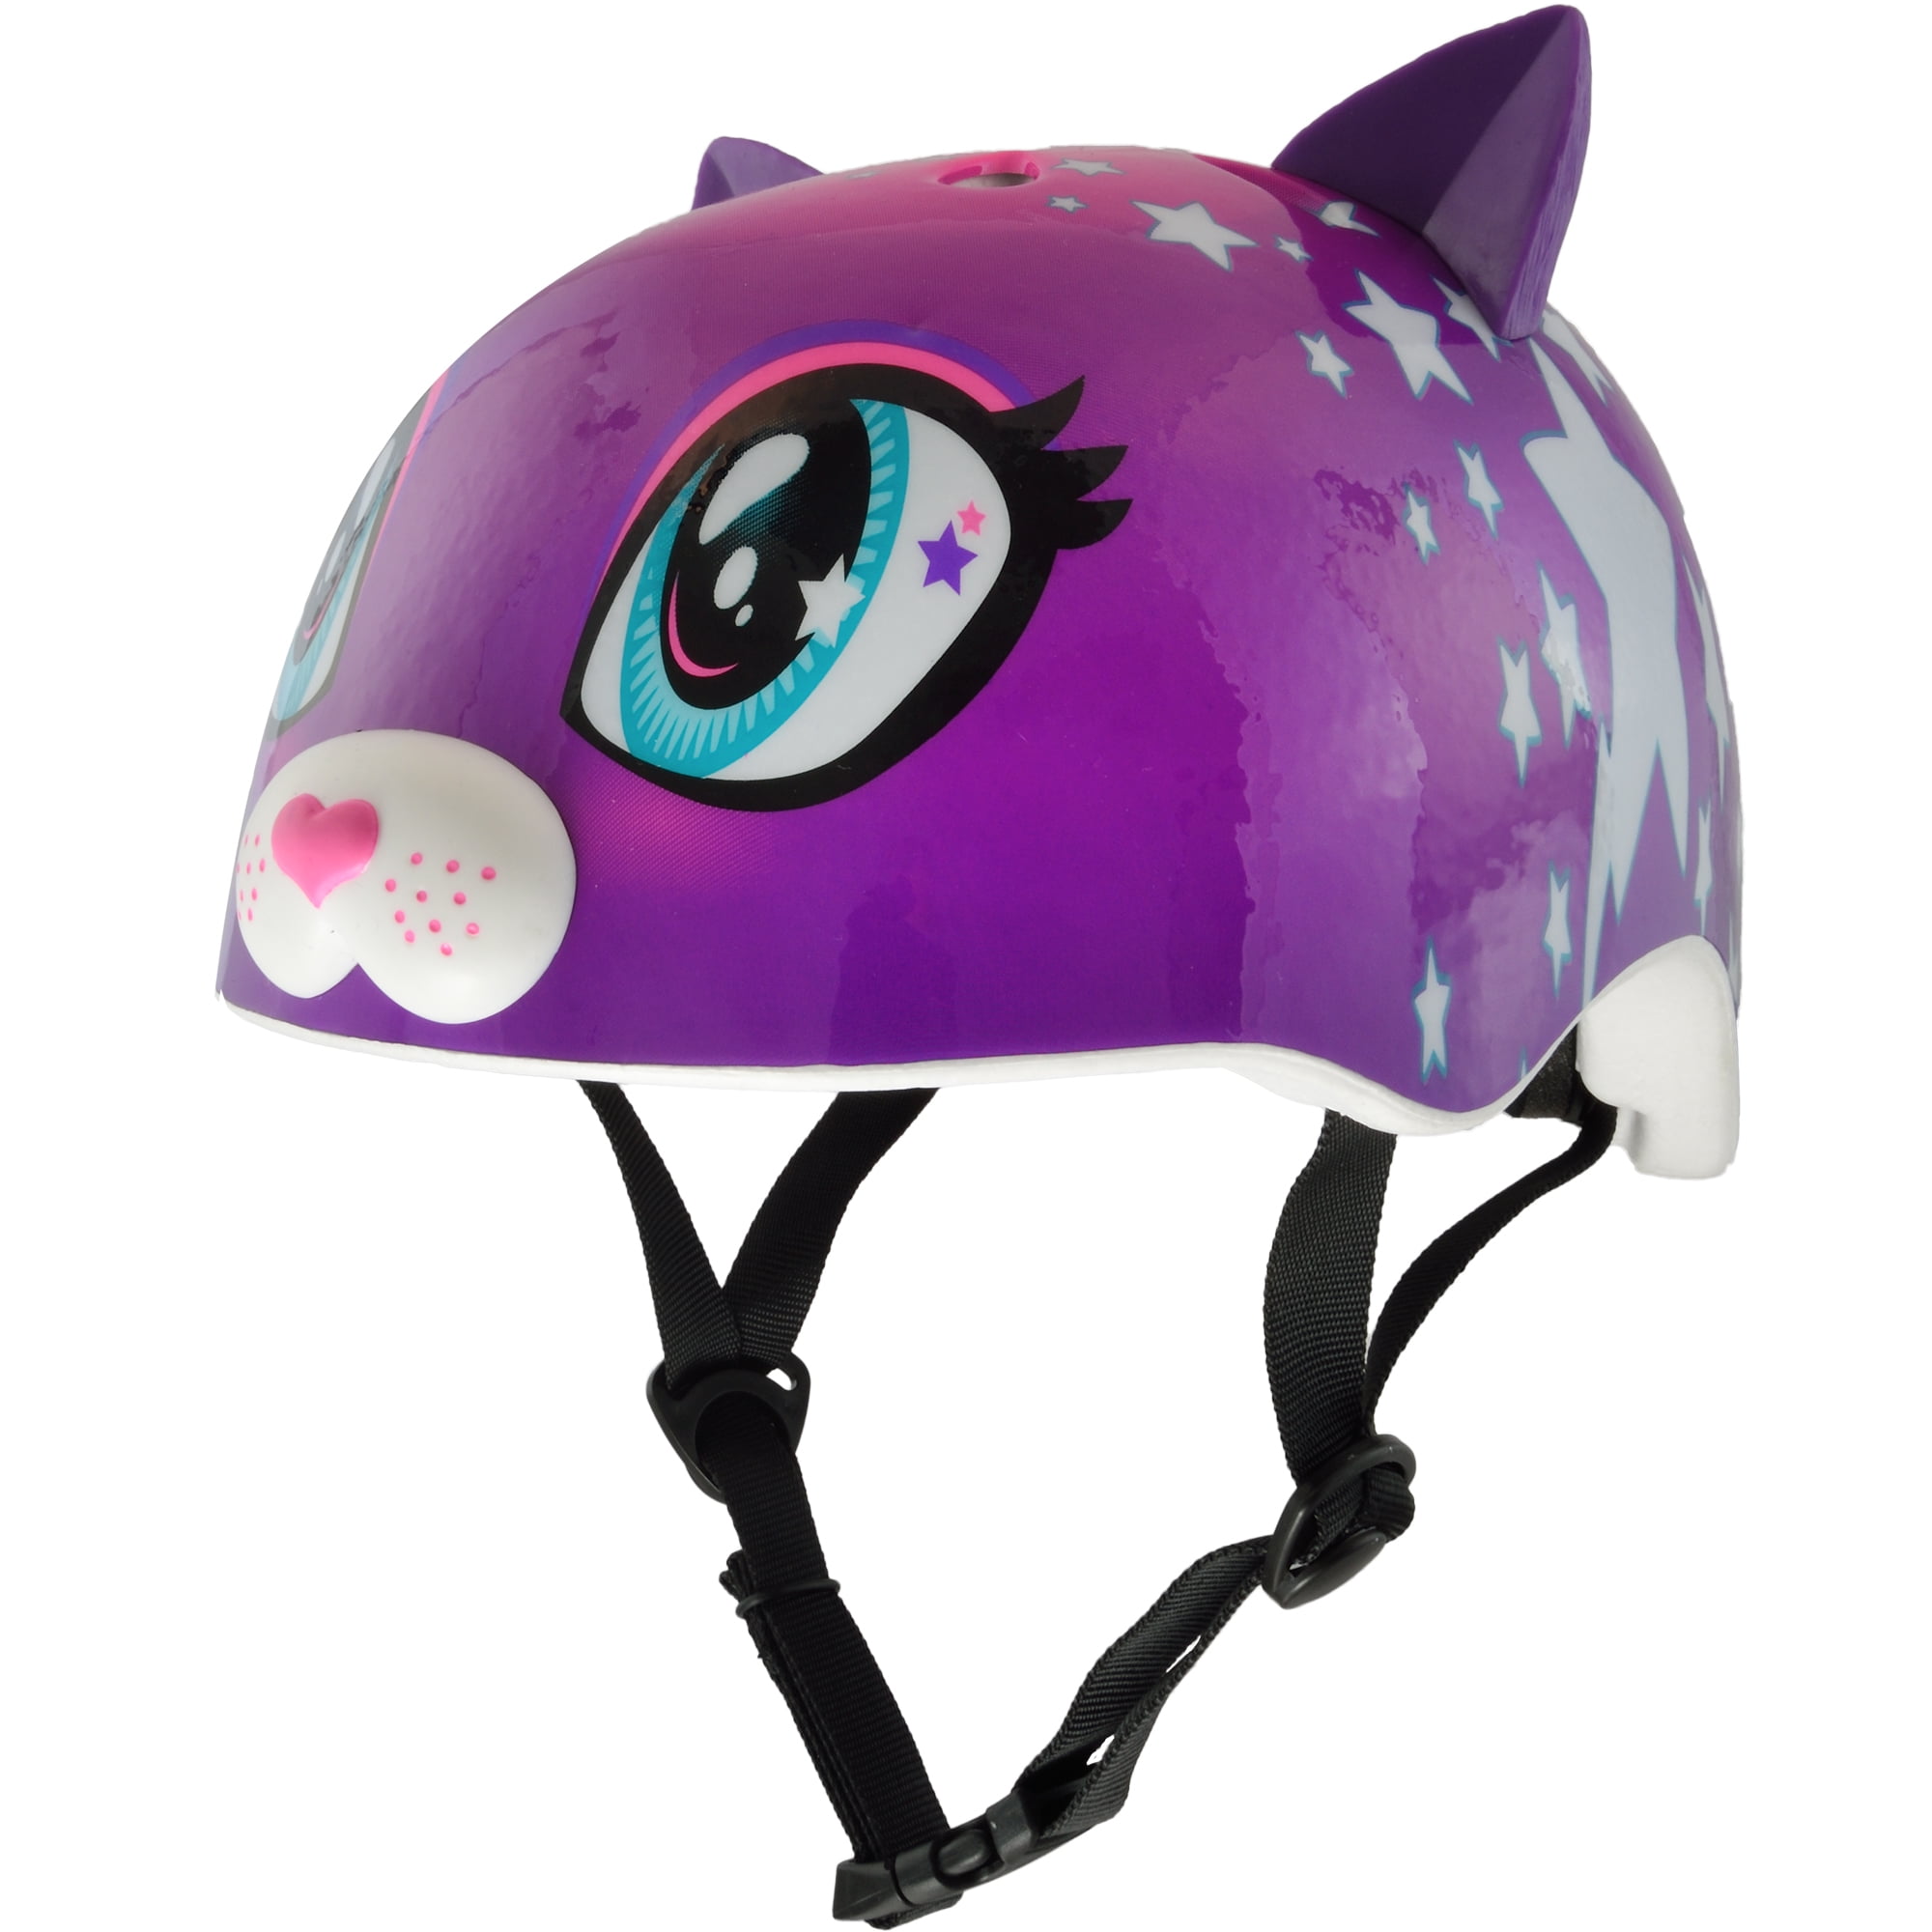 Details about   Nickelodeon's Sky PAW Patrol Girl Bicycle Helmet ages 3-5 Pink Pink New 